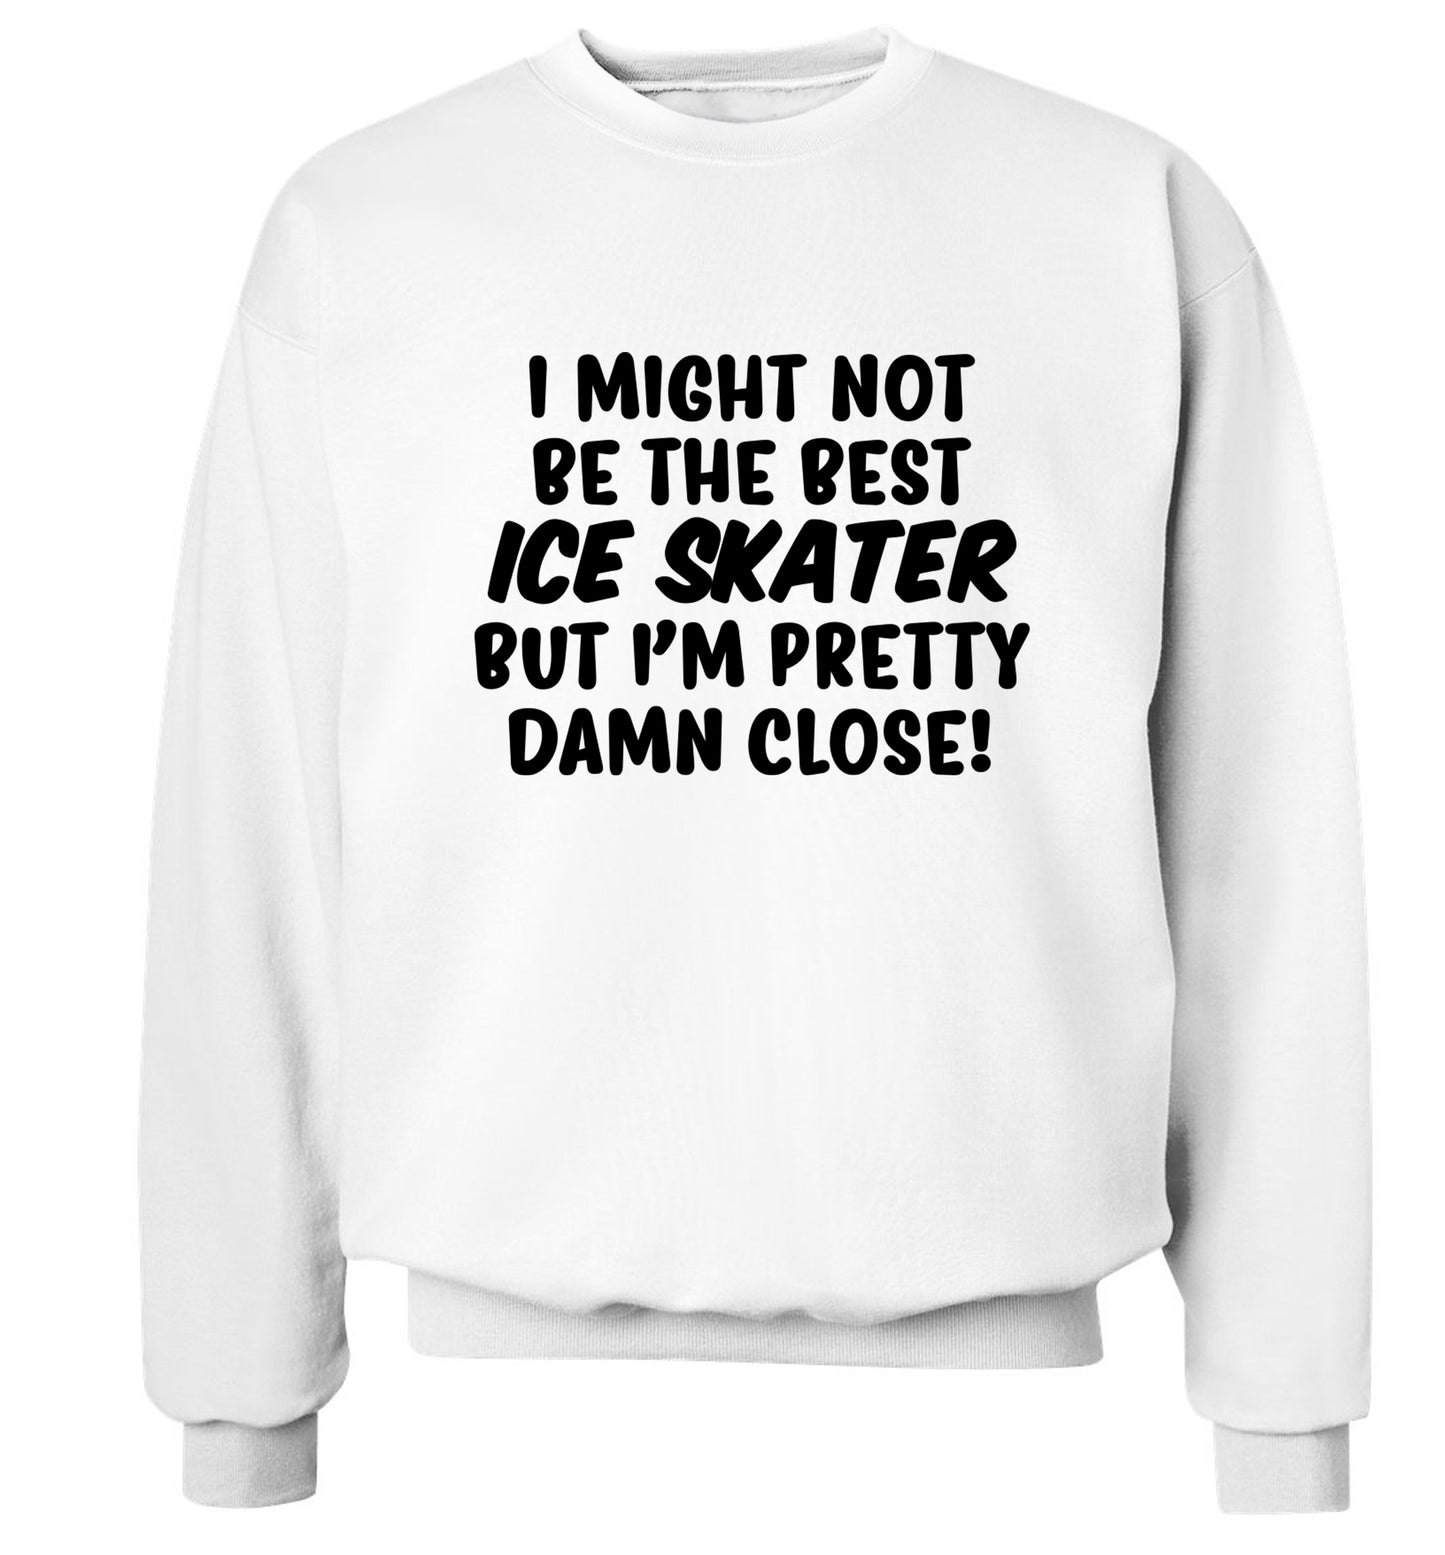 I might not be the best ice skater but I'm pretty damn close! Adult's unisexwhite Sweater 2XL